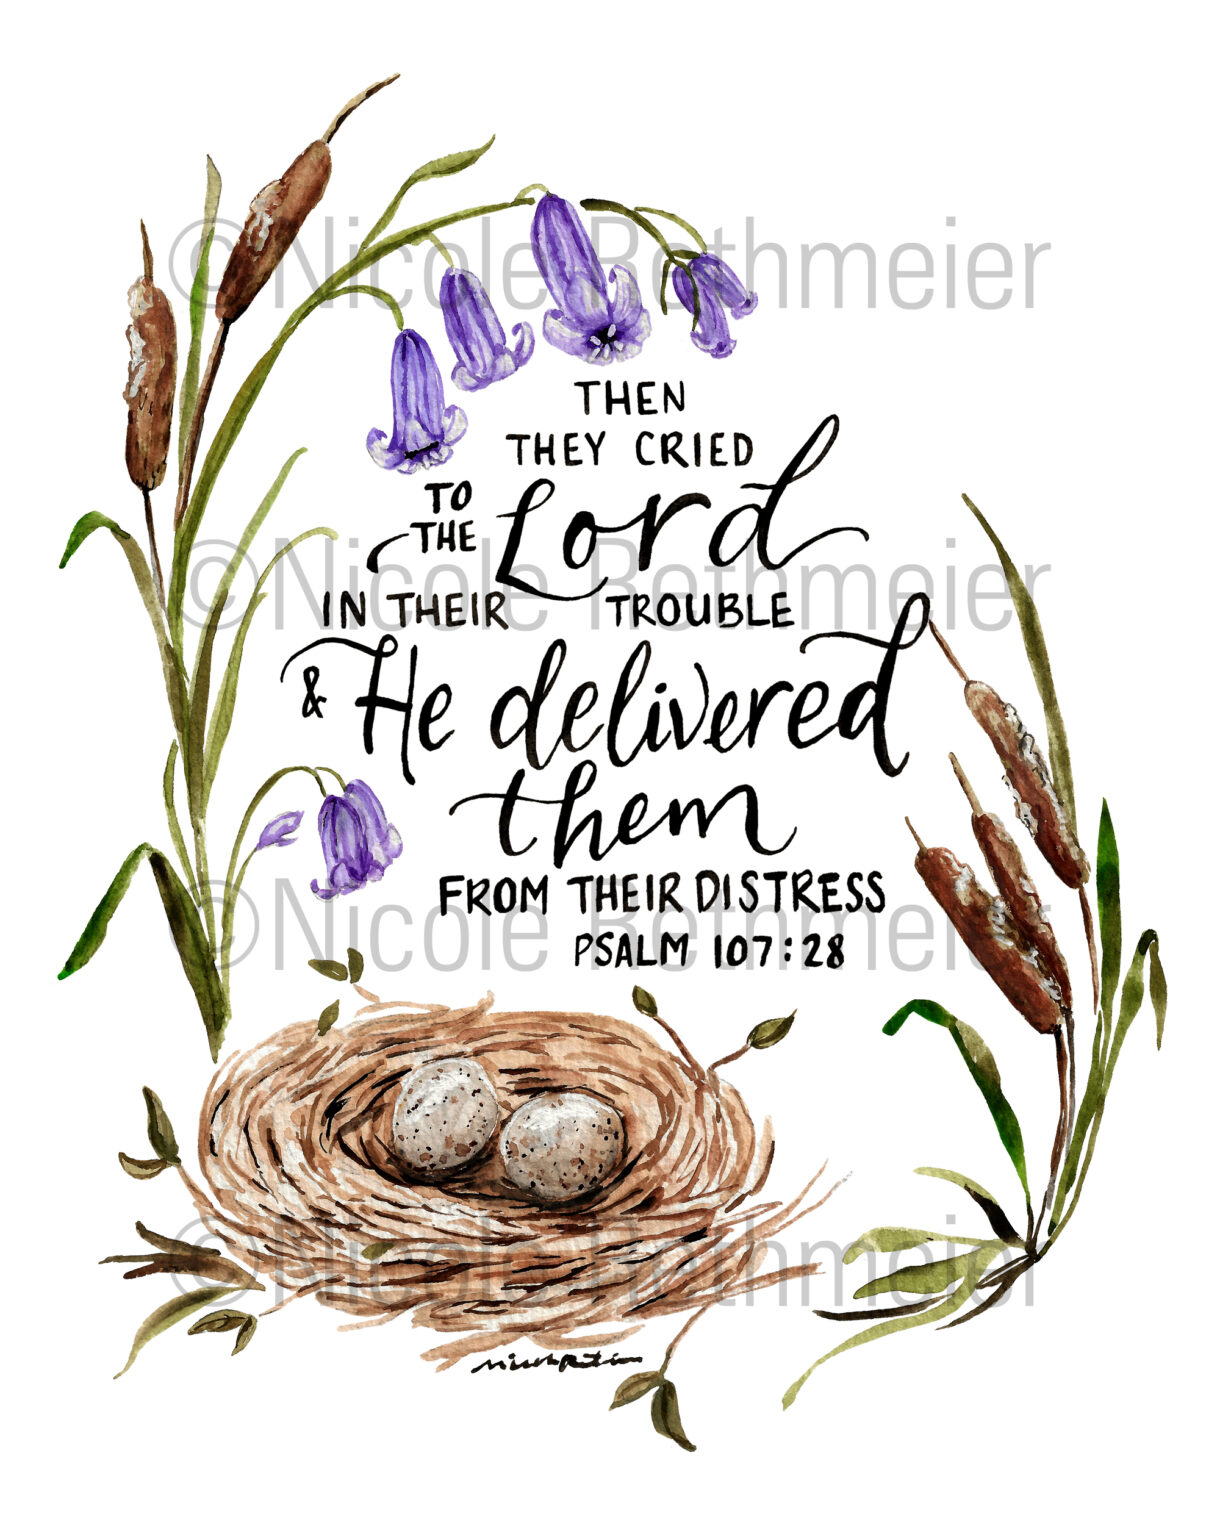 They Cried to the Lord Psalm 107:28 - Bluebells and sparrow nest watercolor fine art print